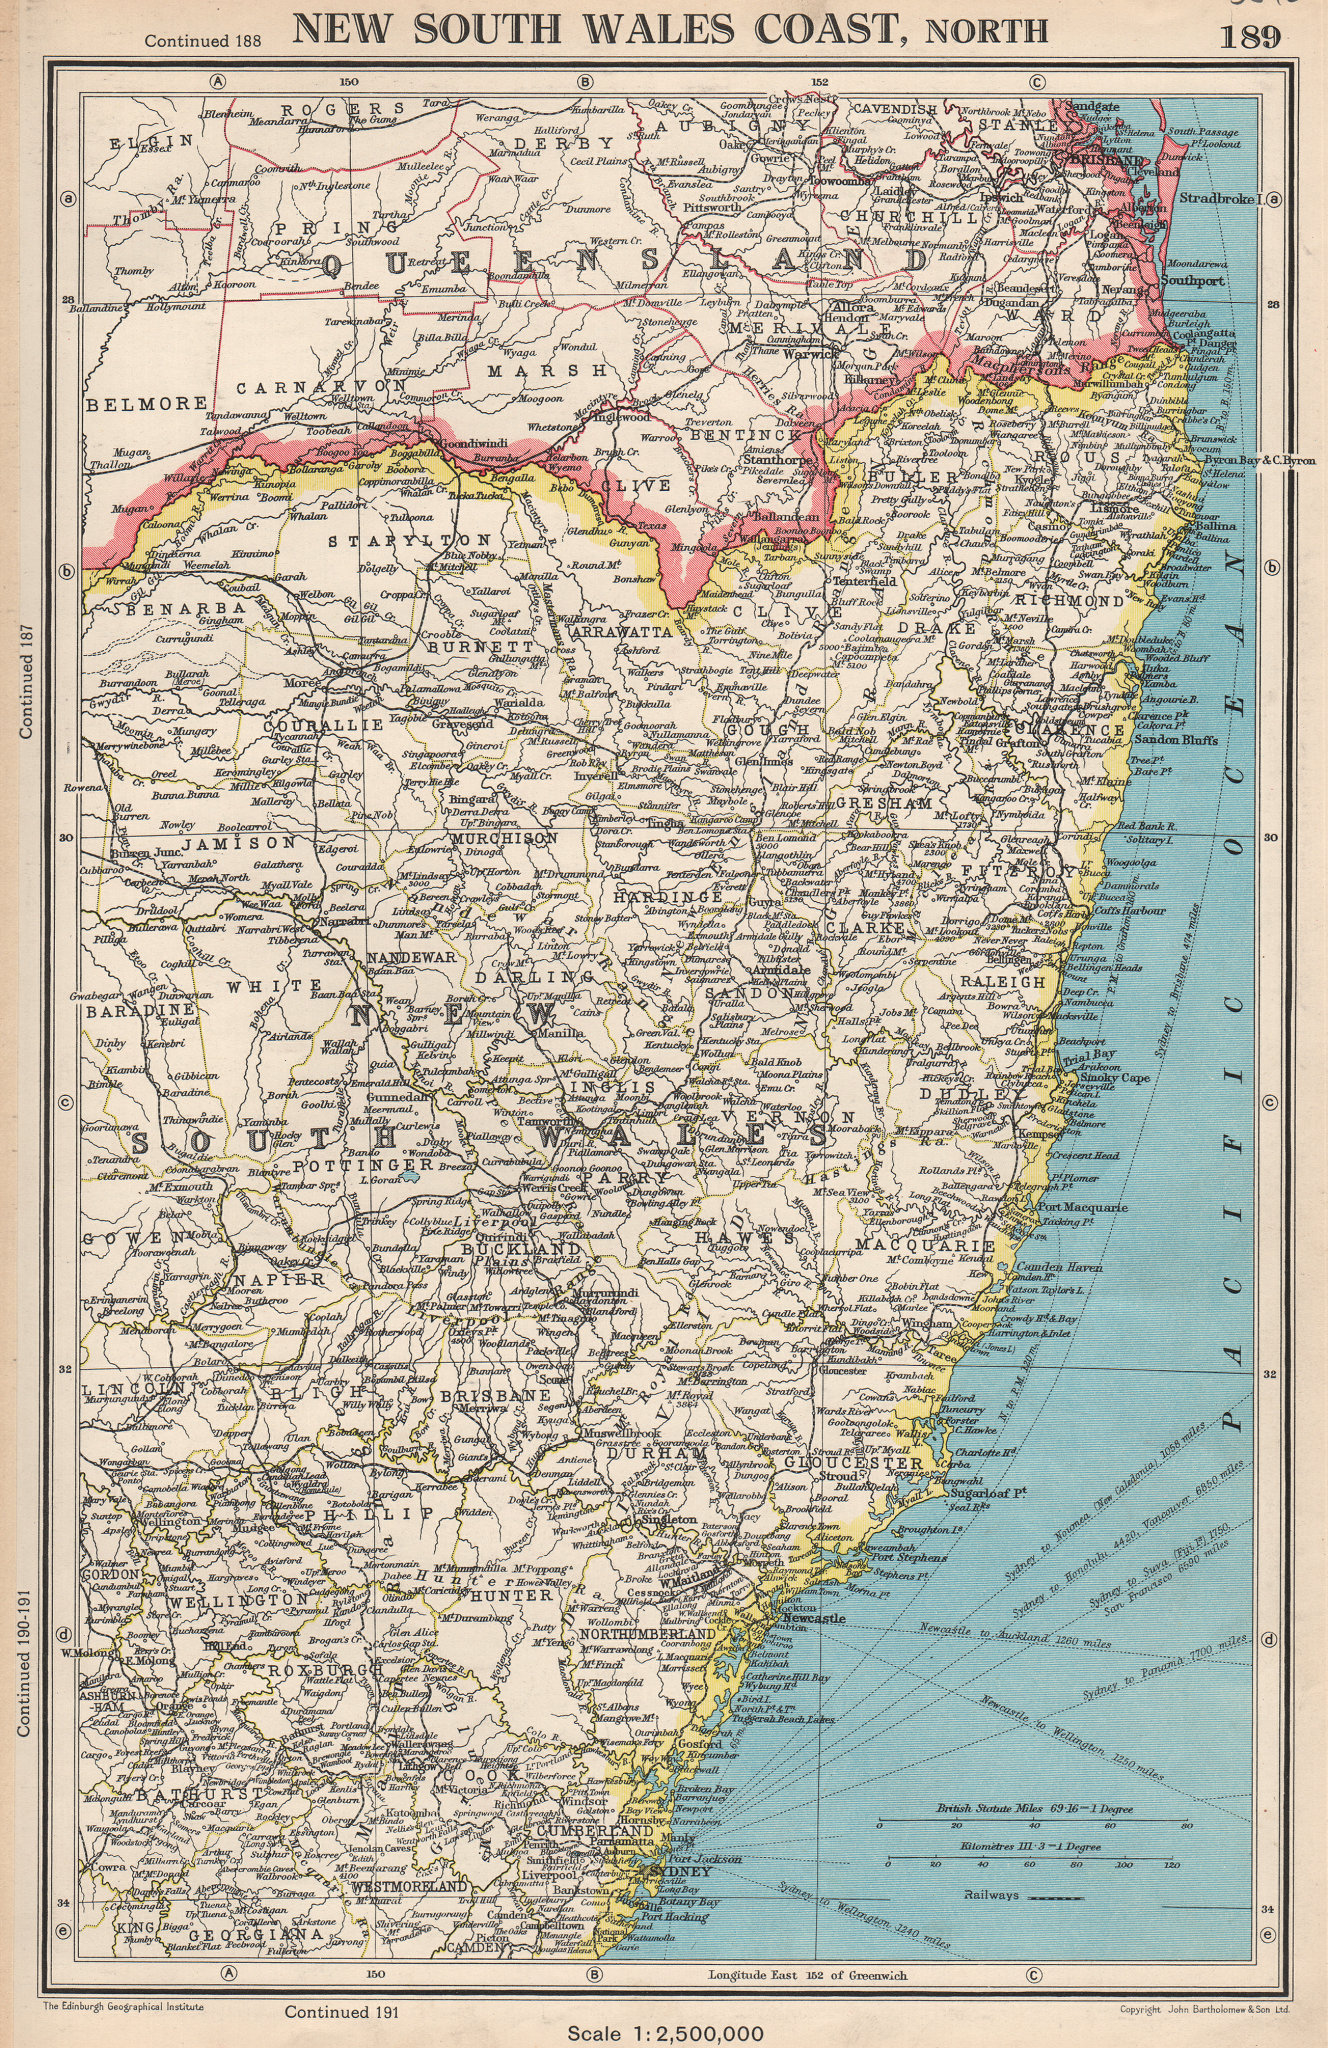 Associate Product NEW SOUTH WALES COAST, NORTH. showing counties. BARTHOLOMEW 1952 old map